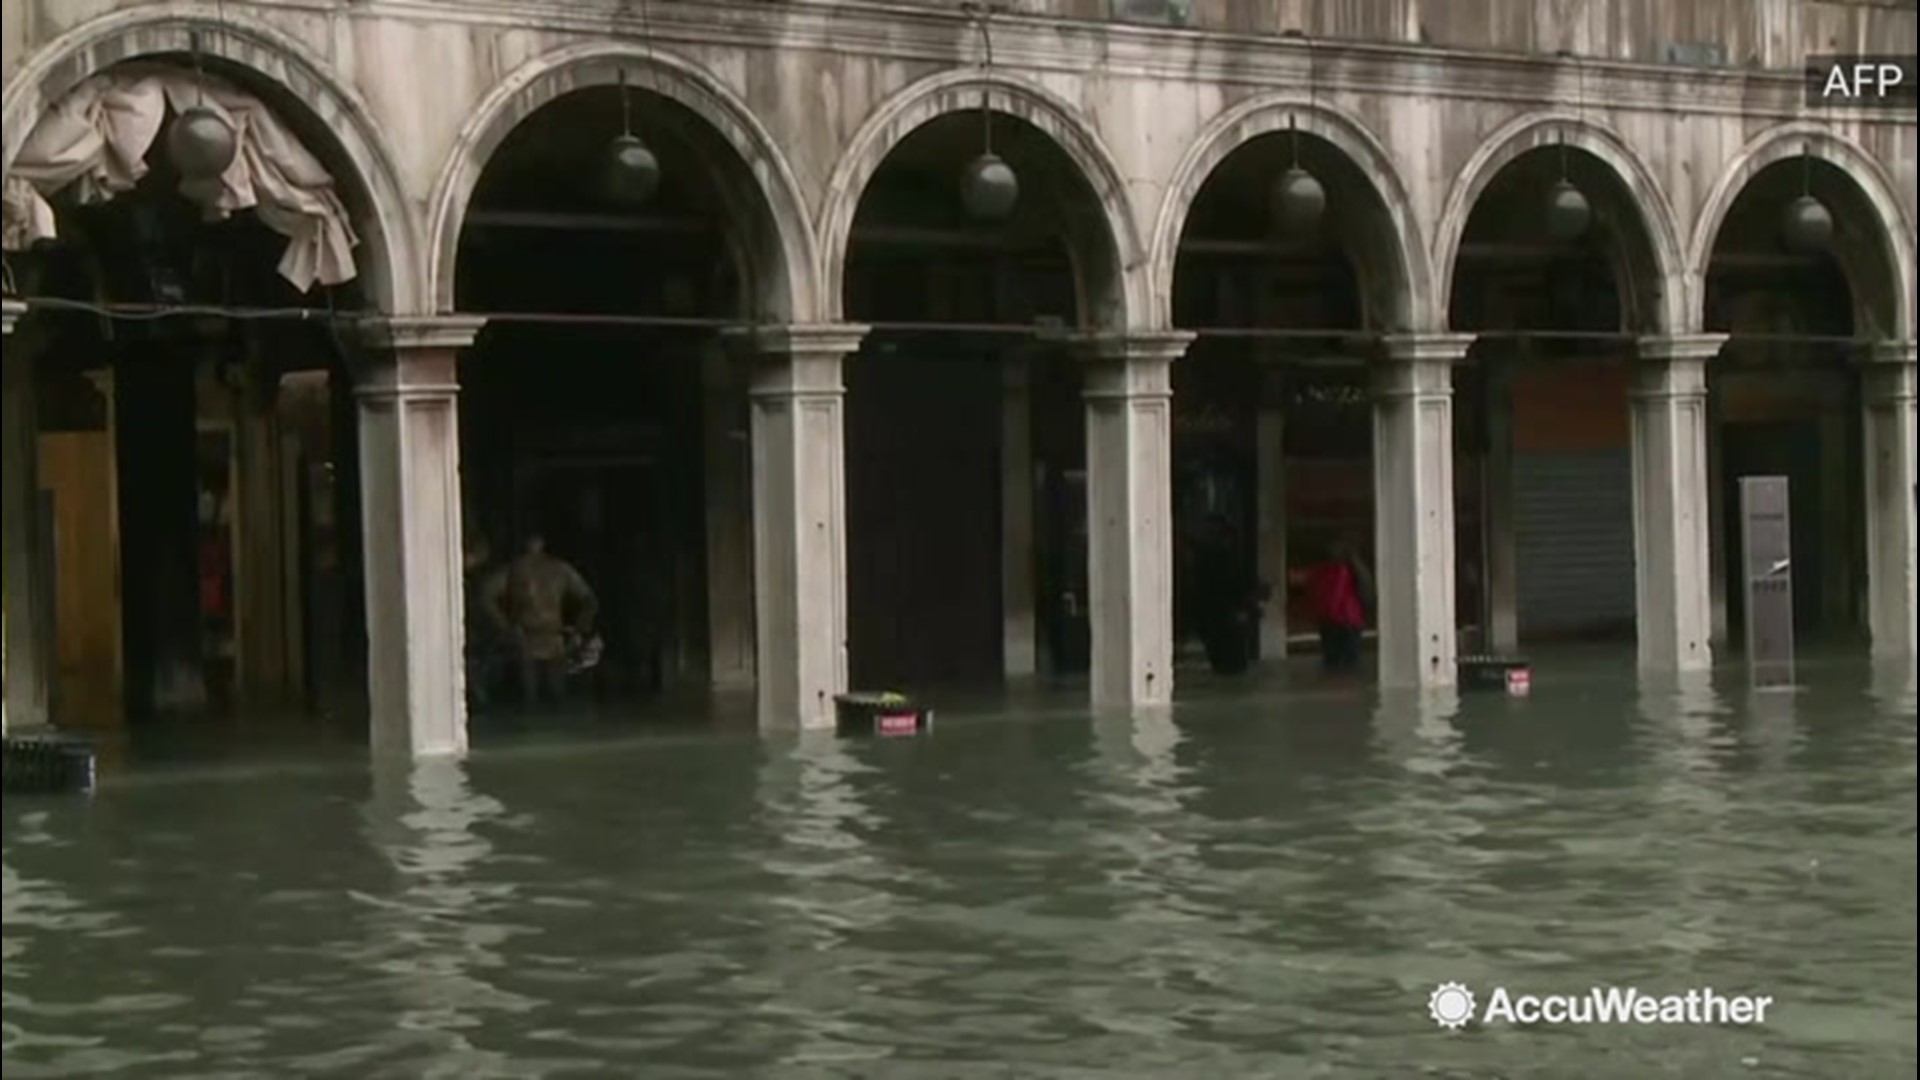 The already flooded city Venice, Italy, is bracing for another exceptionally high tide, after they've declared a state of emergency, with several million euros of damage done on Nov. 15.